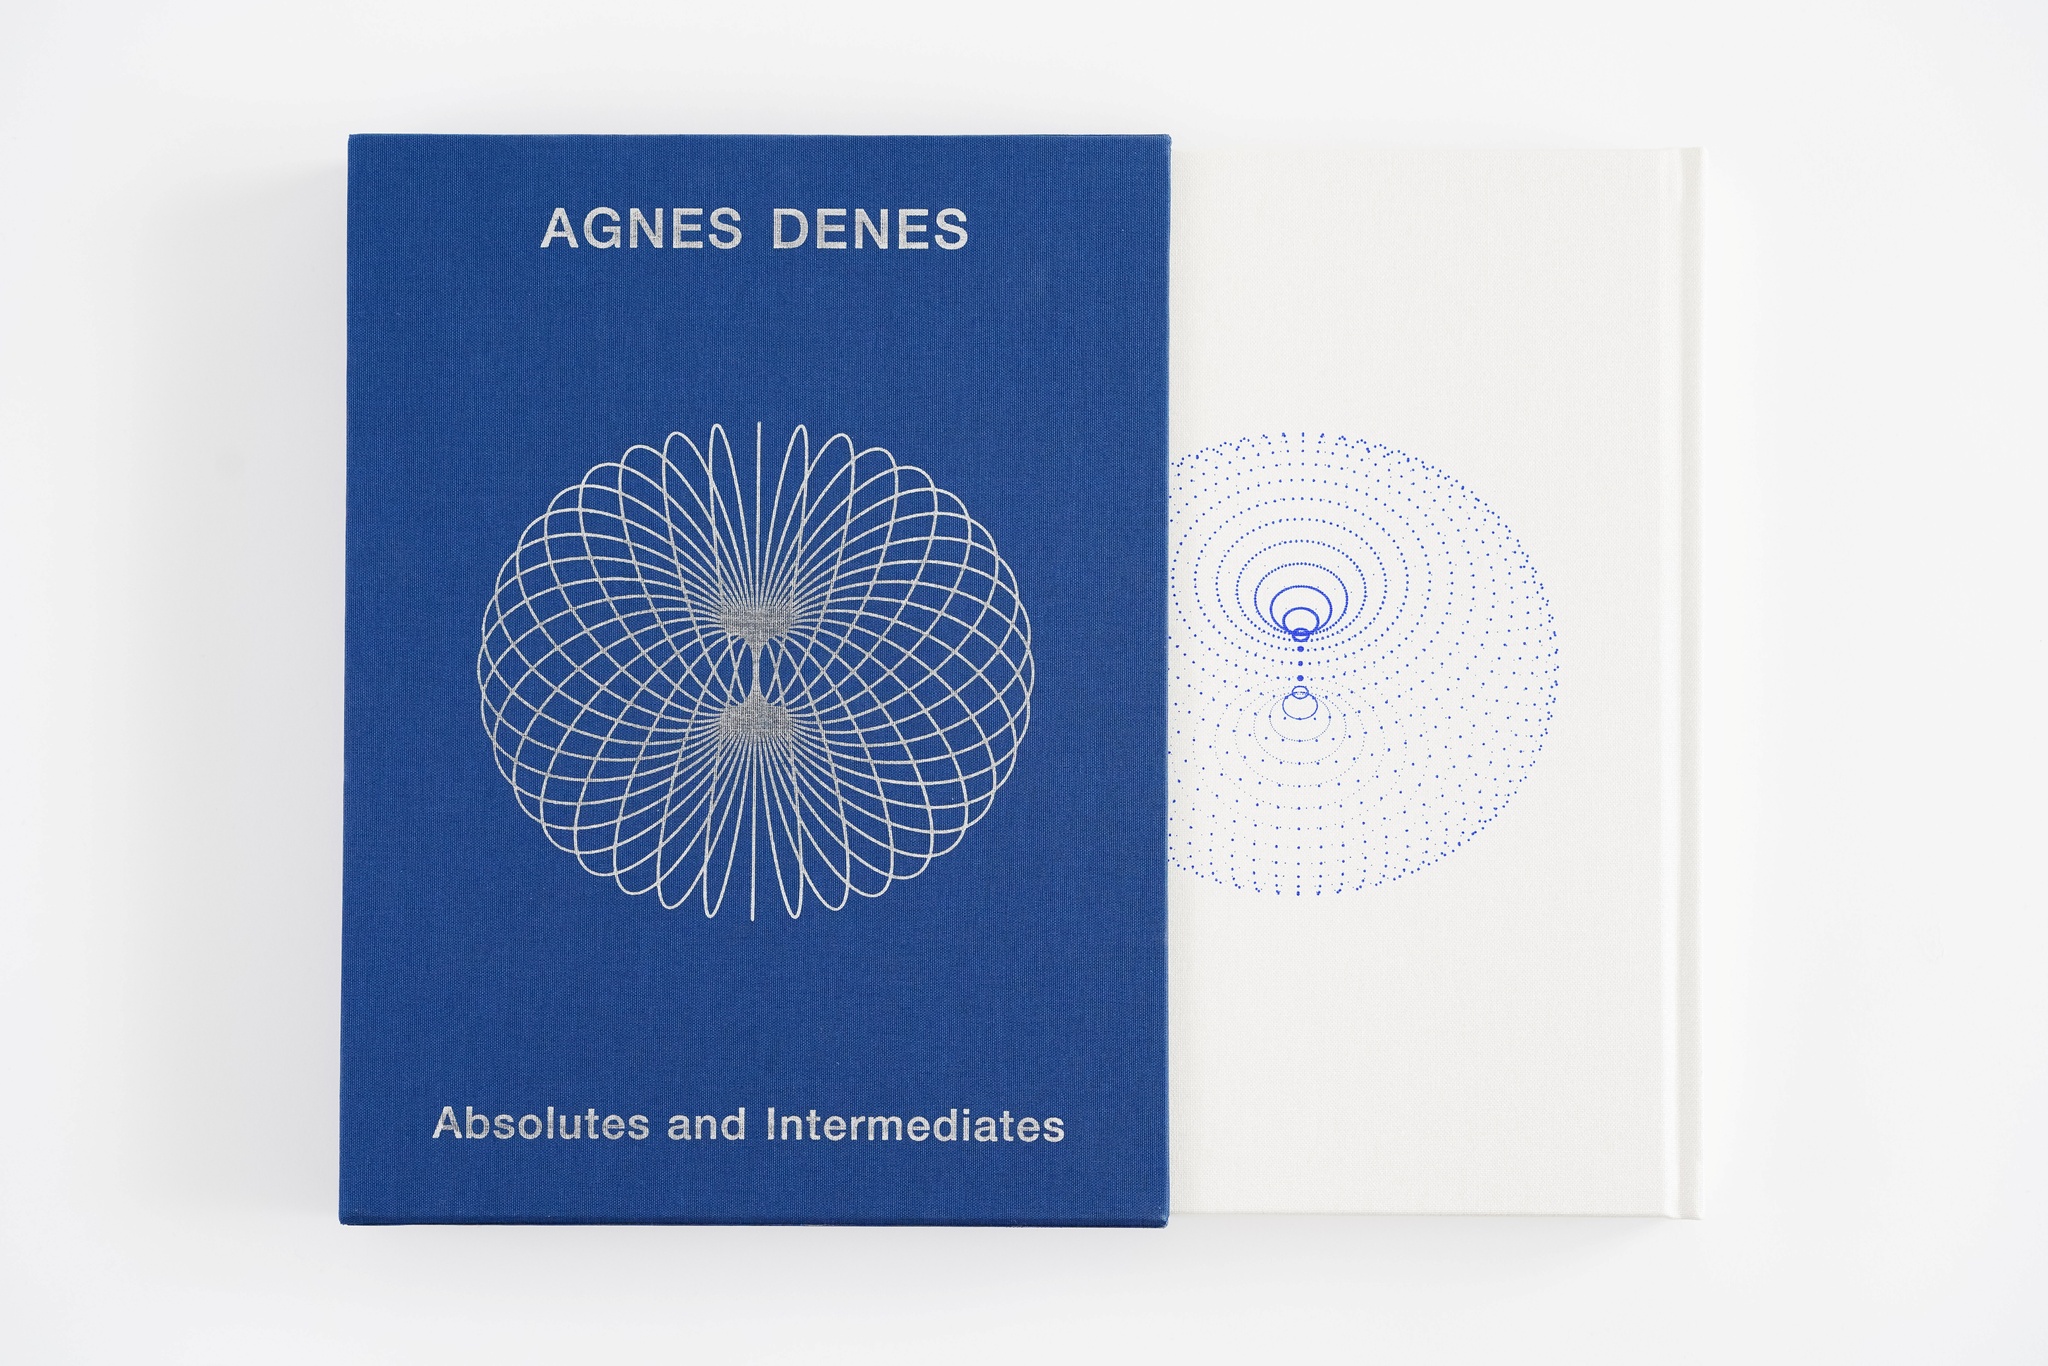 A white book halfway out of a blue slipcase decorated with a doughnut form